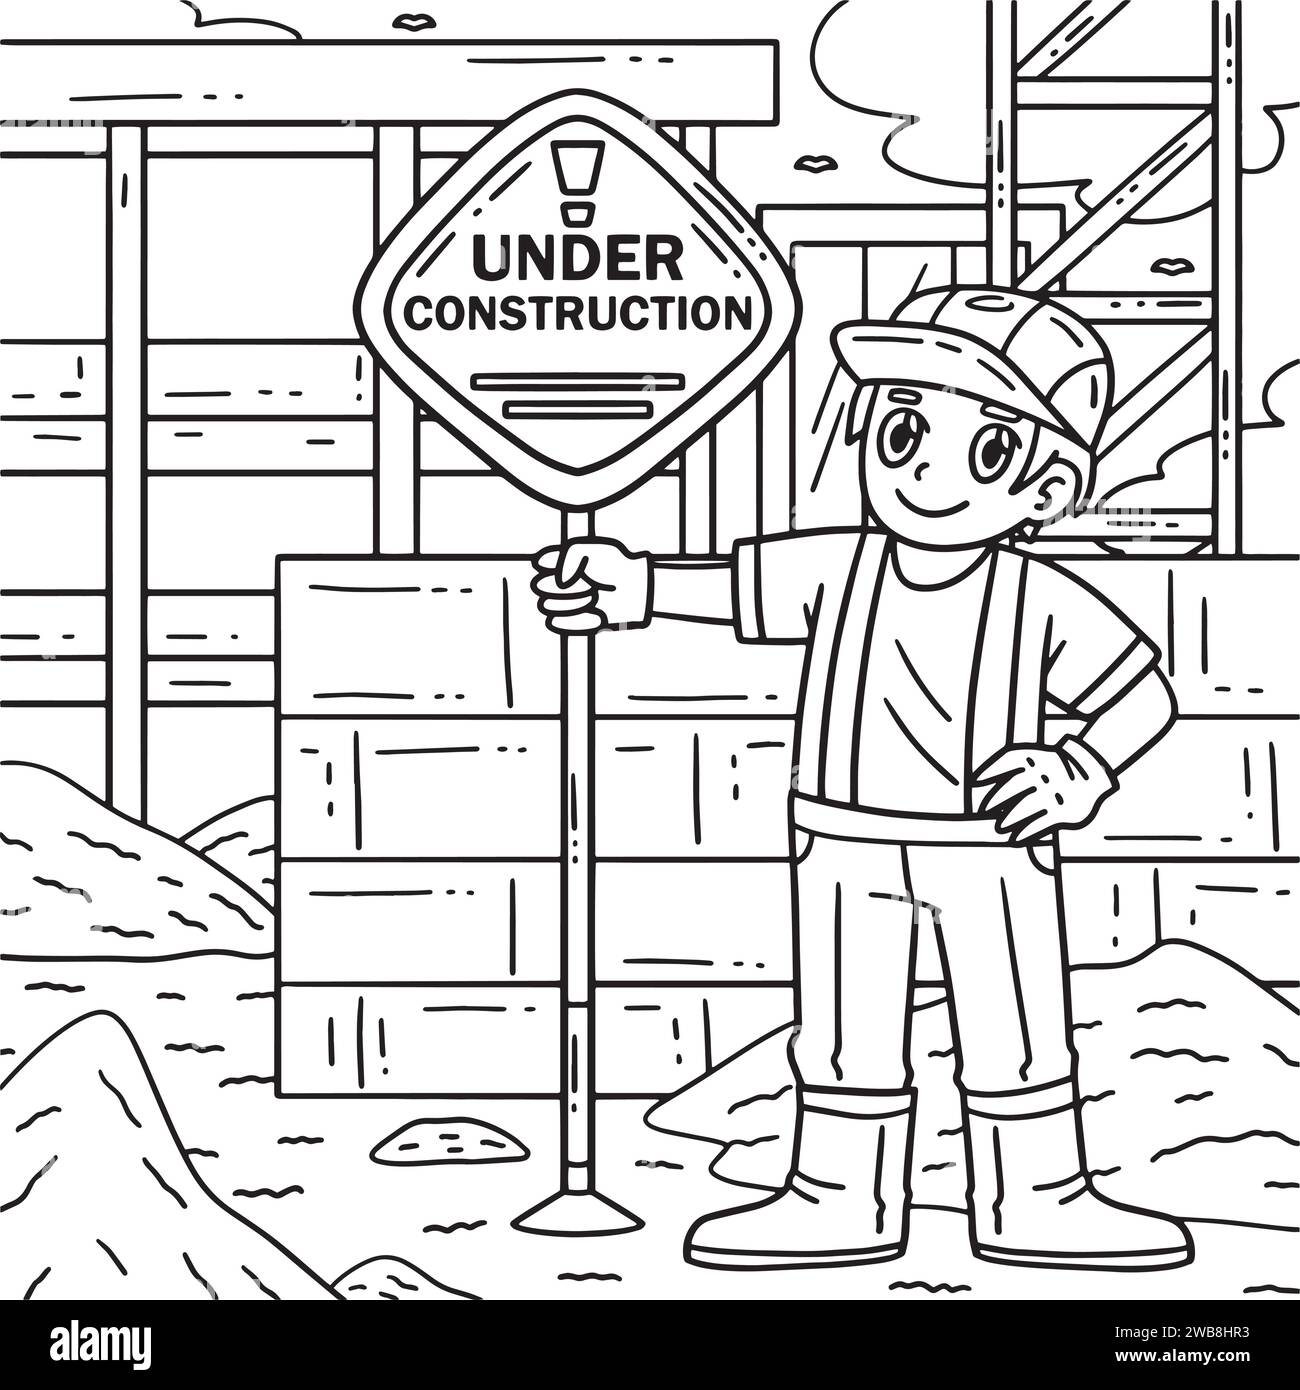 Construction Worker Holding Signage Coloring Page Stock Vector